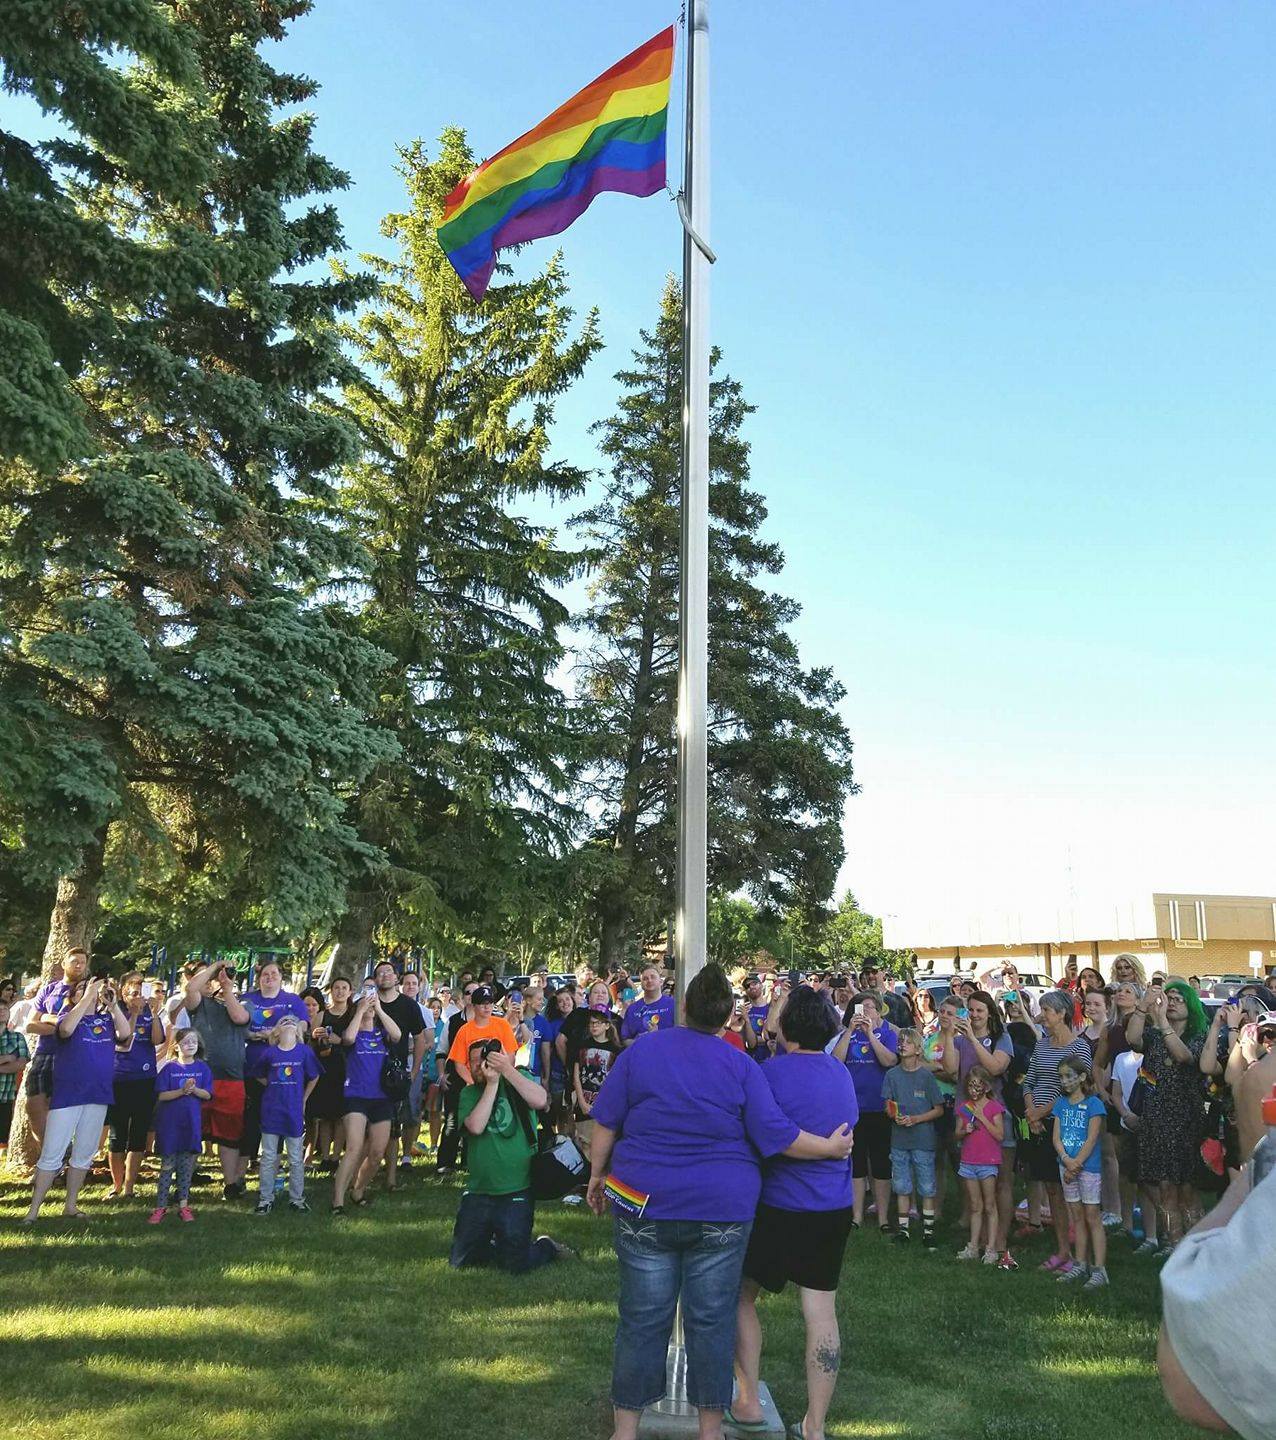 The Taber Pride flag raises for the first tim on June 12, 2017.